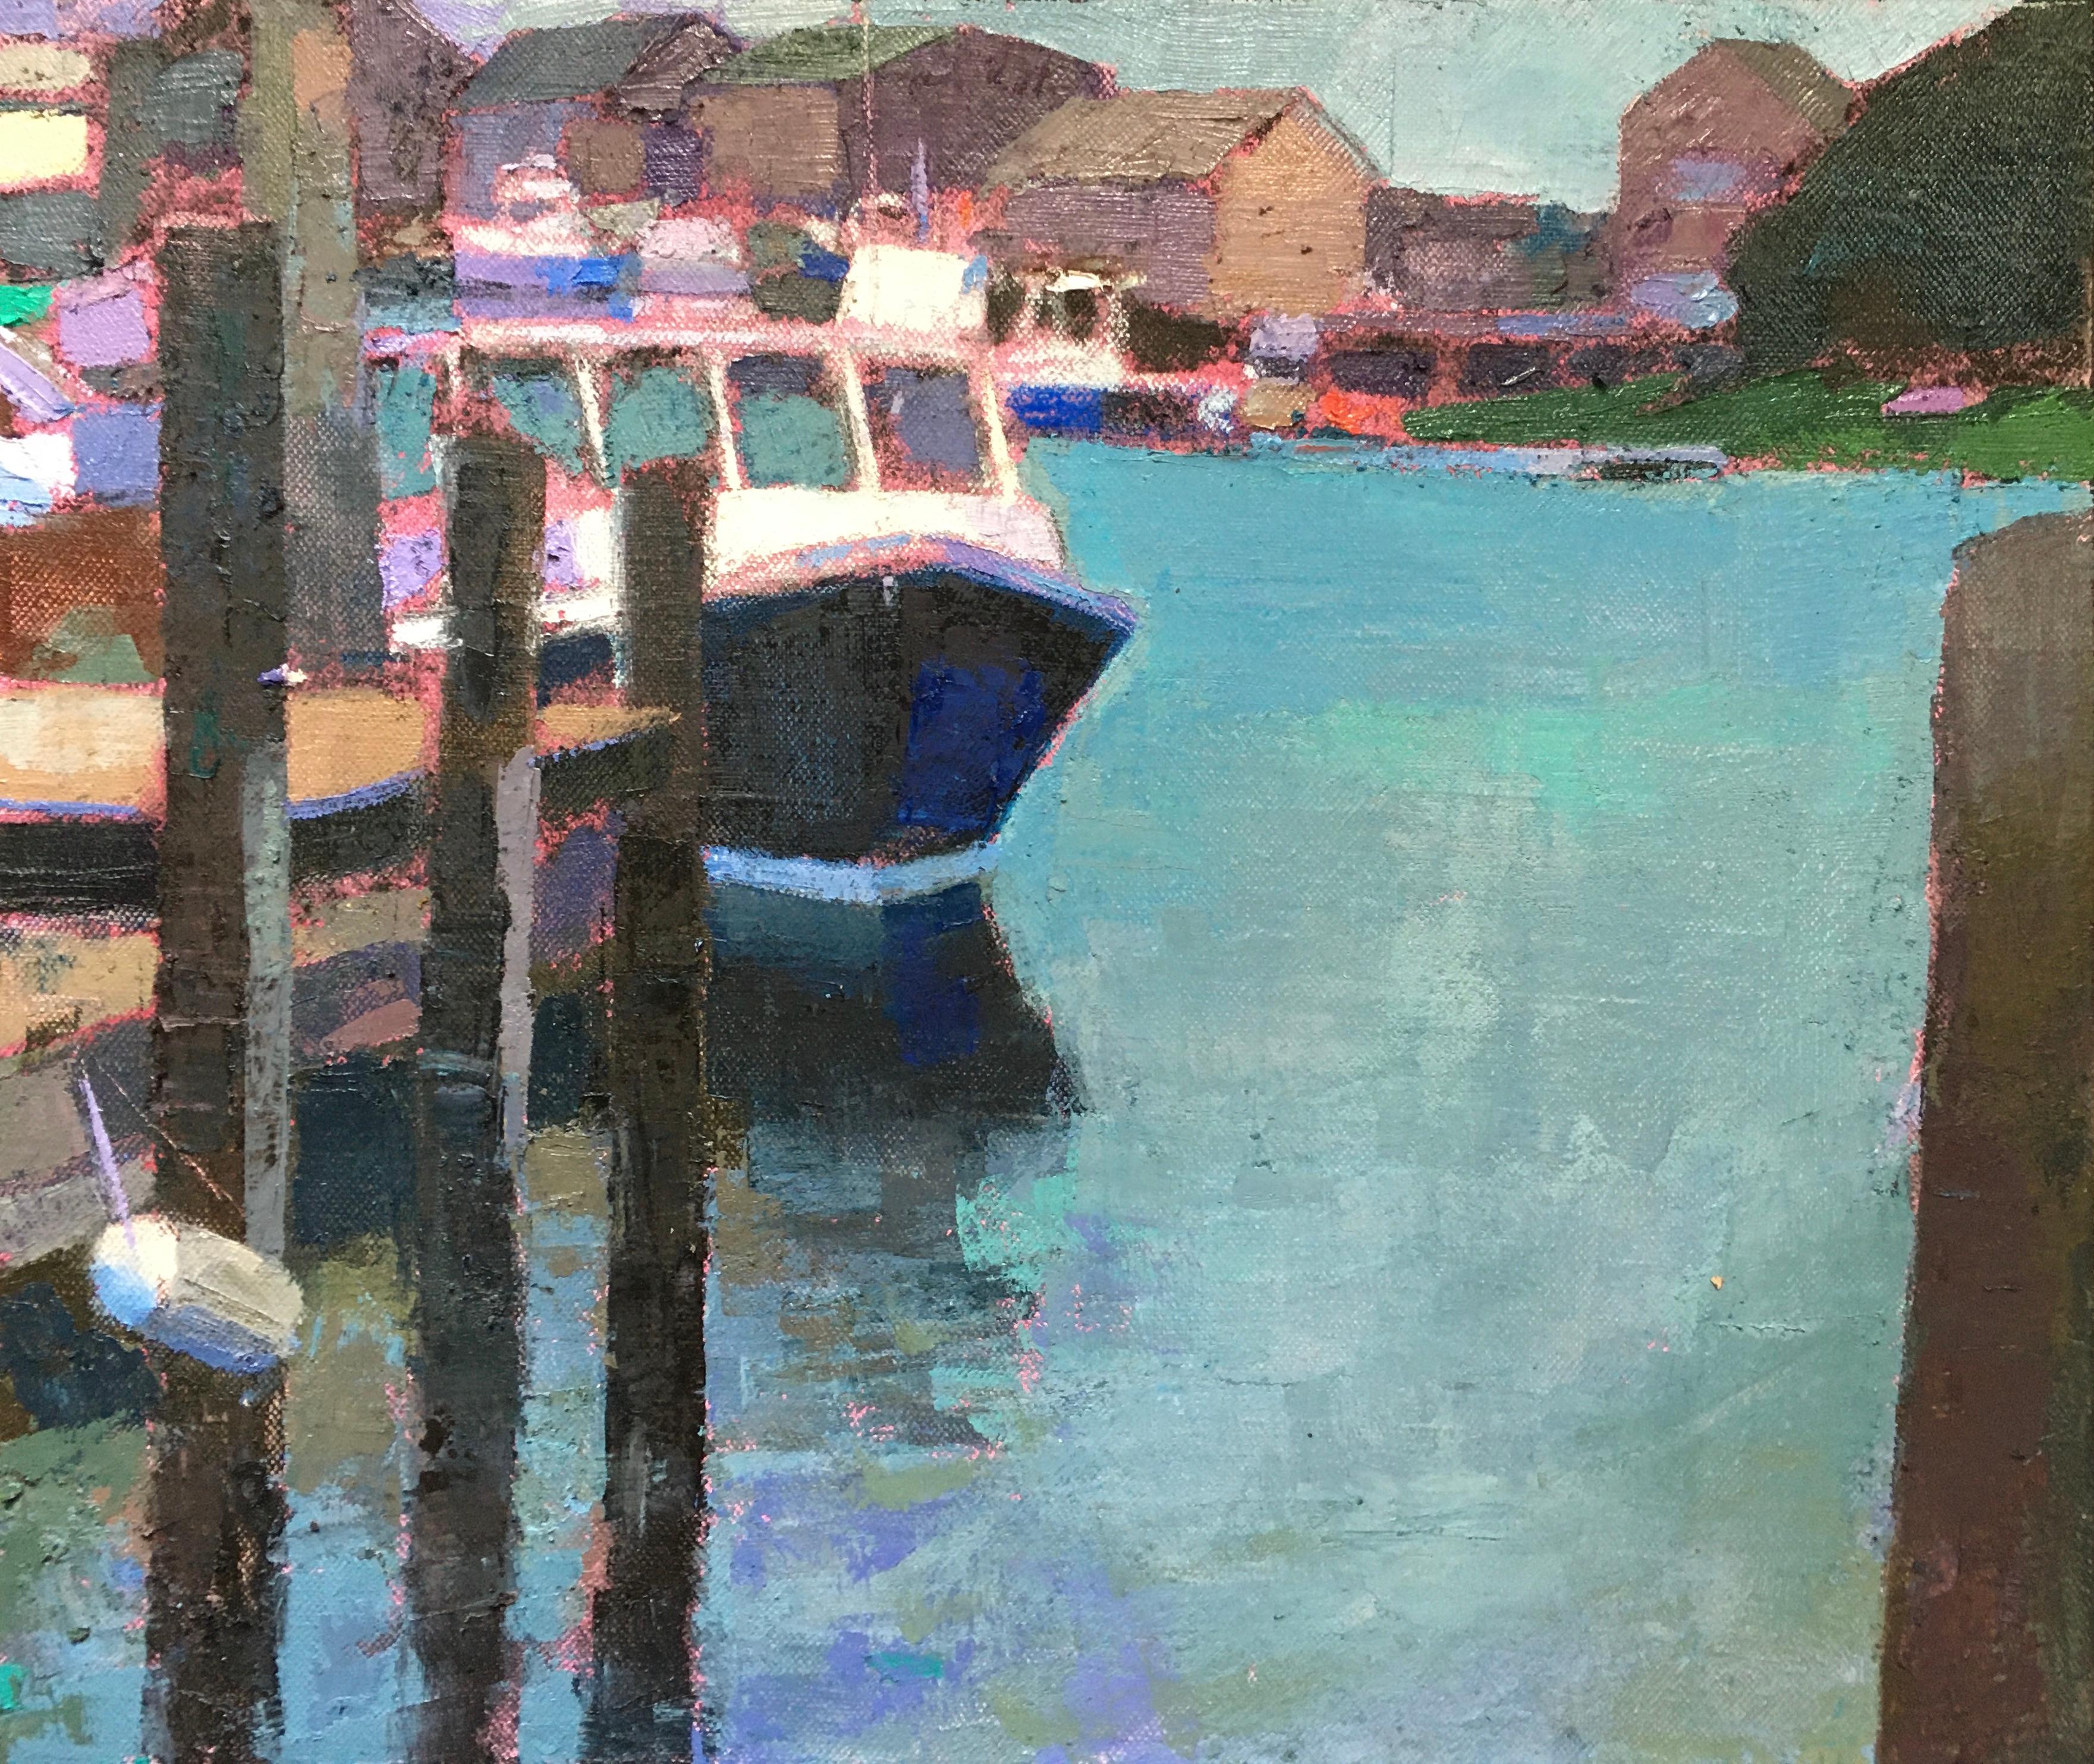 Larry Horowitz Landscape Painting - "Menemsha Wharf" oil painting of a vibrant wharf featuring boats and houses